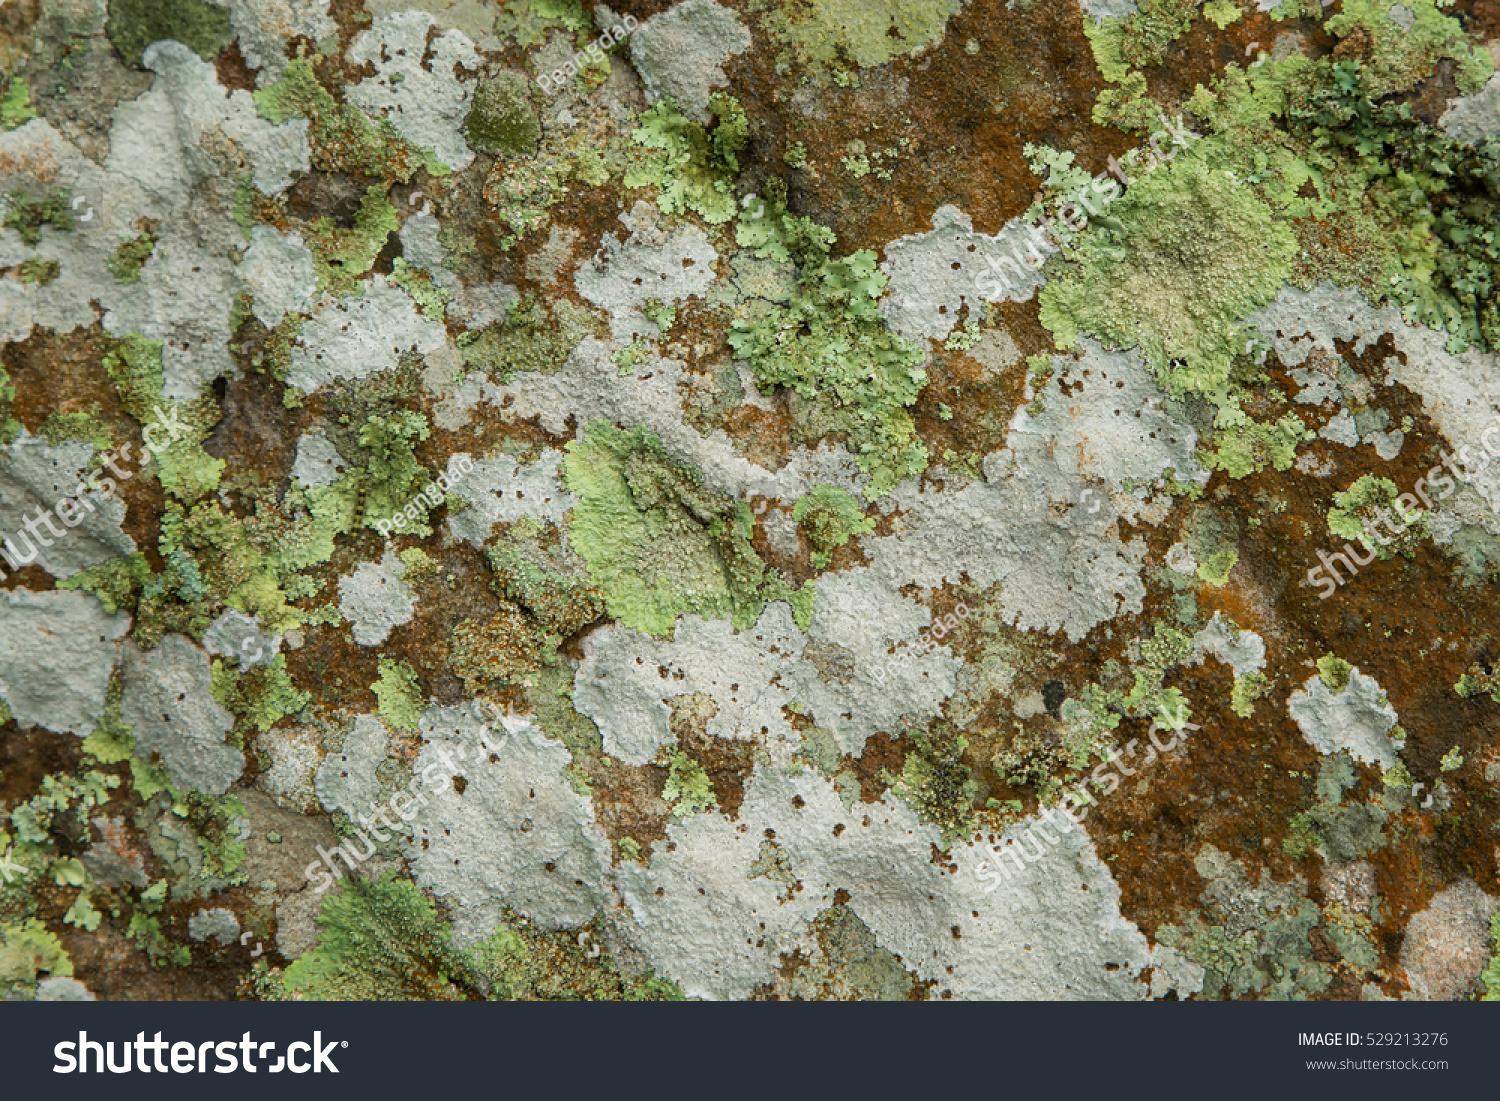 stock-photo-lichen-anthoceros-and-moss-growing-on-stone-529213276.jpg